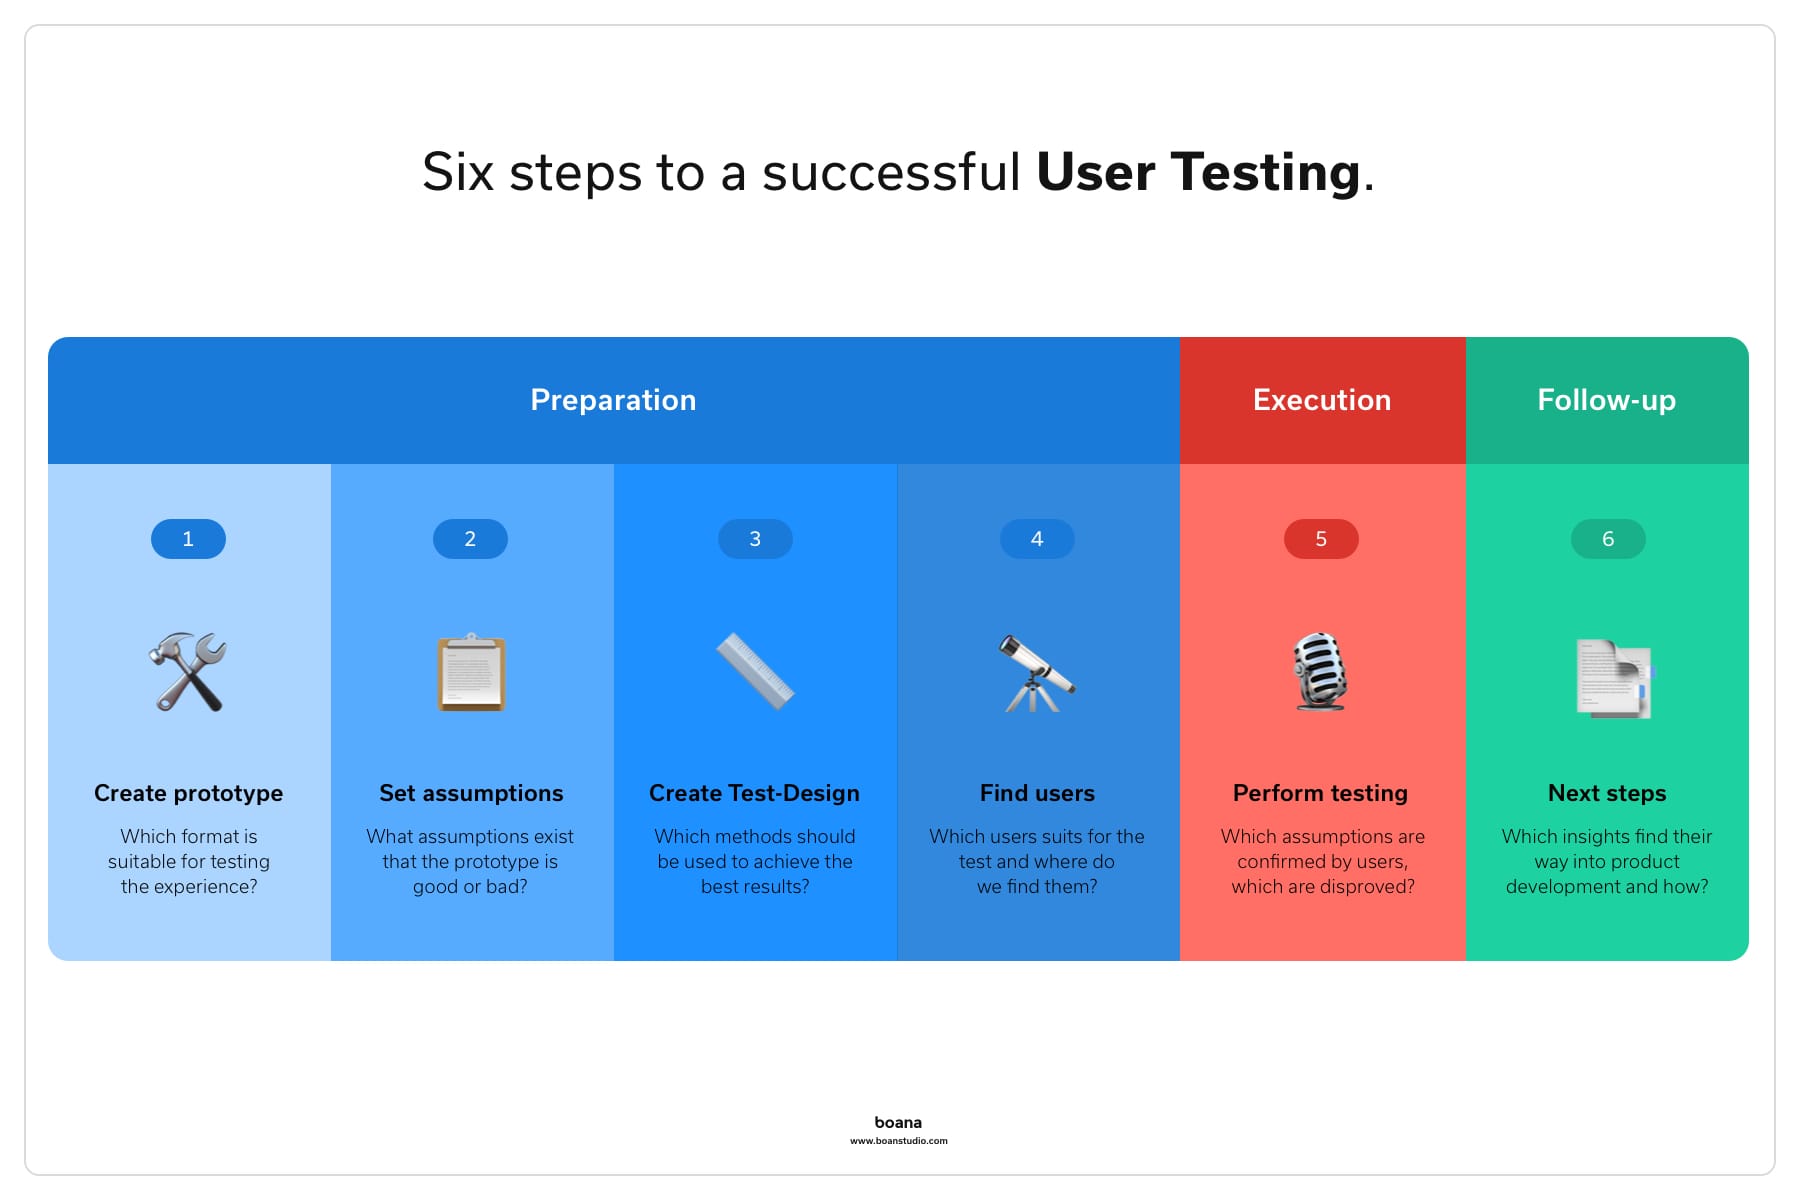 Six stepts to a successful User Testing